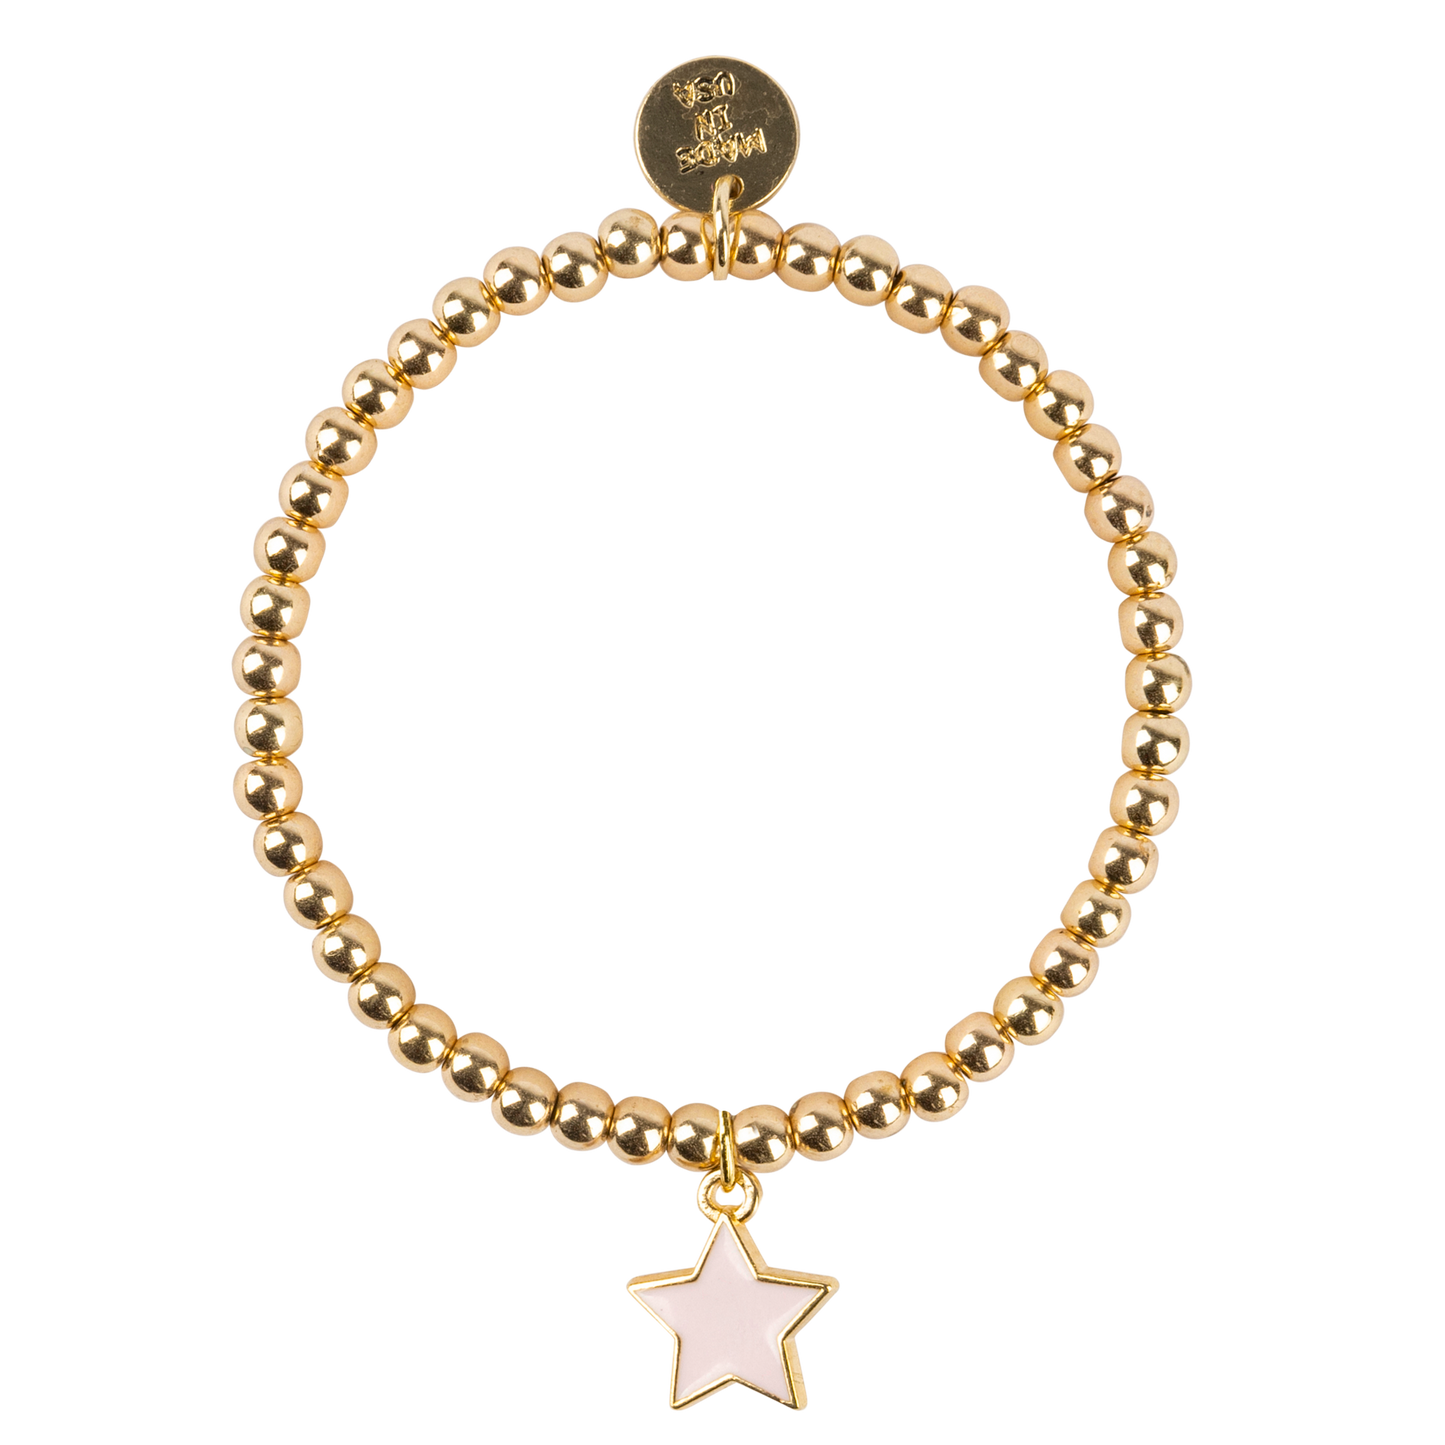 Dainty Gold Bracelet with Star Accent Charm